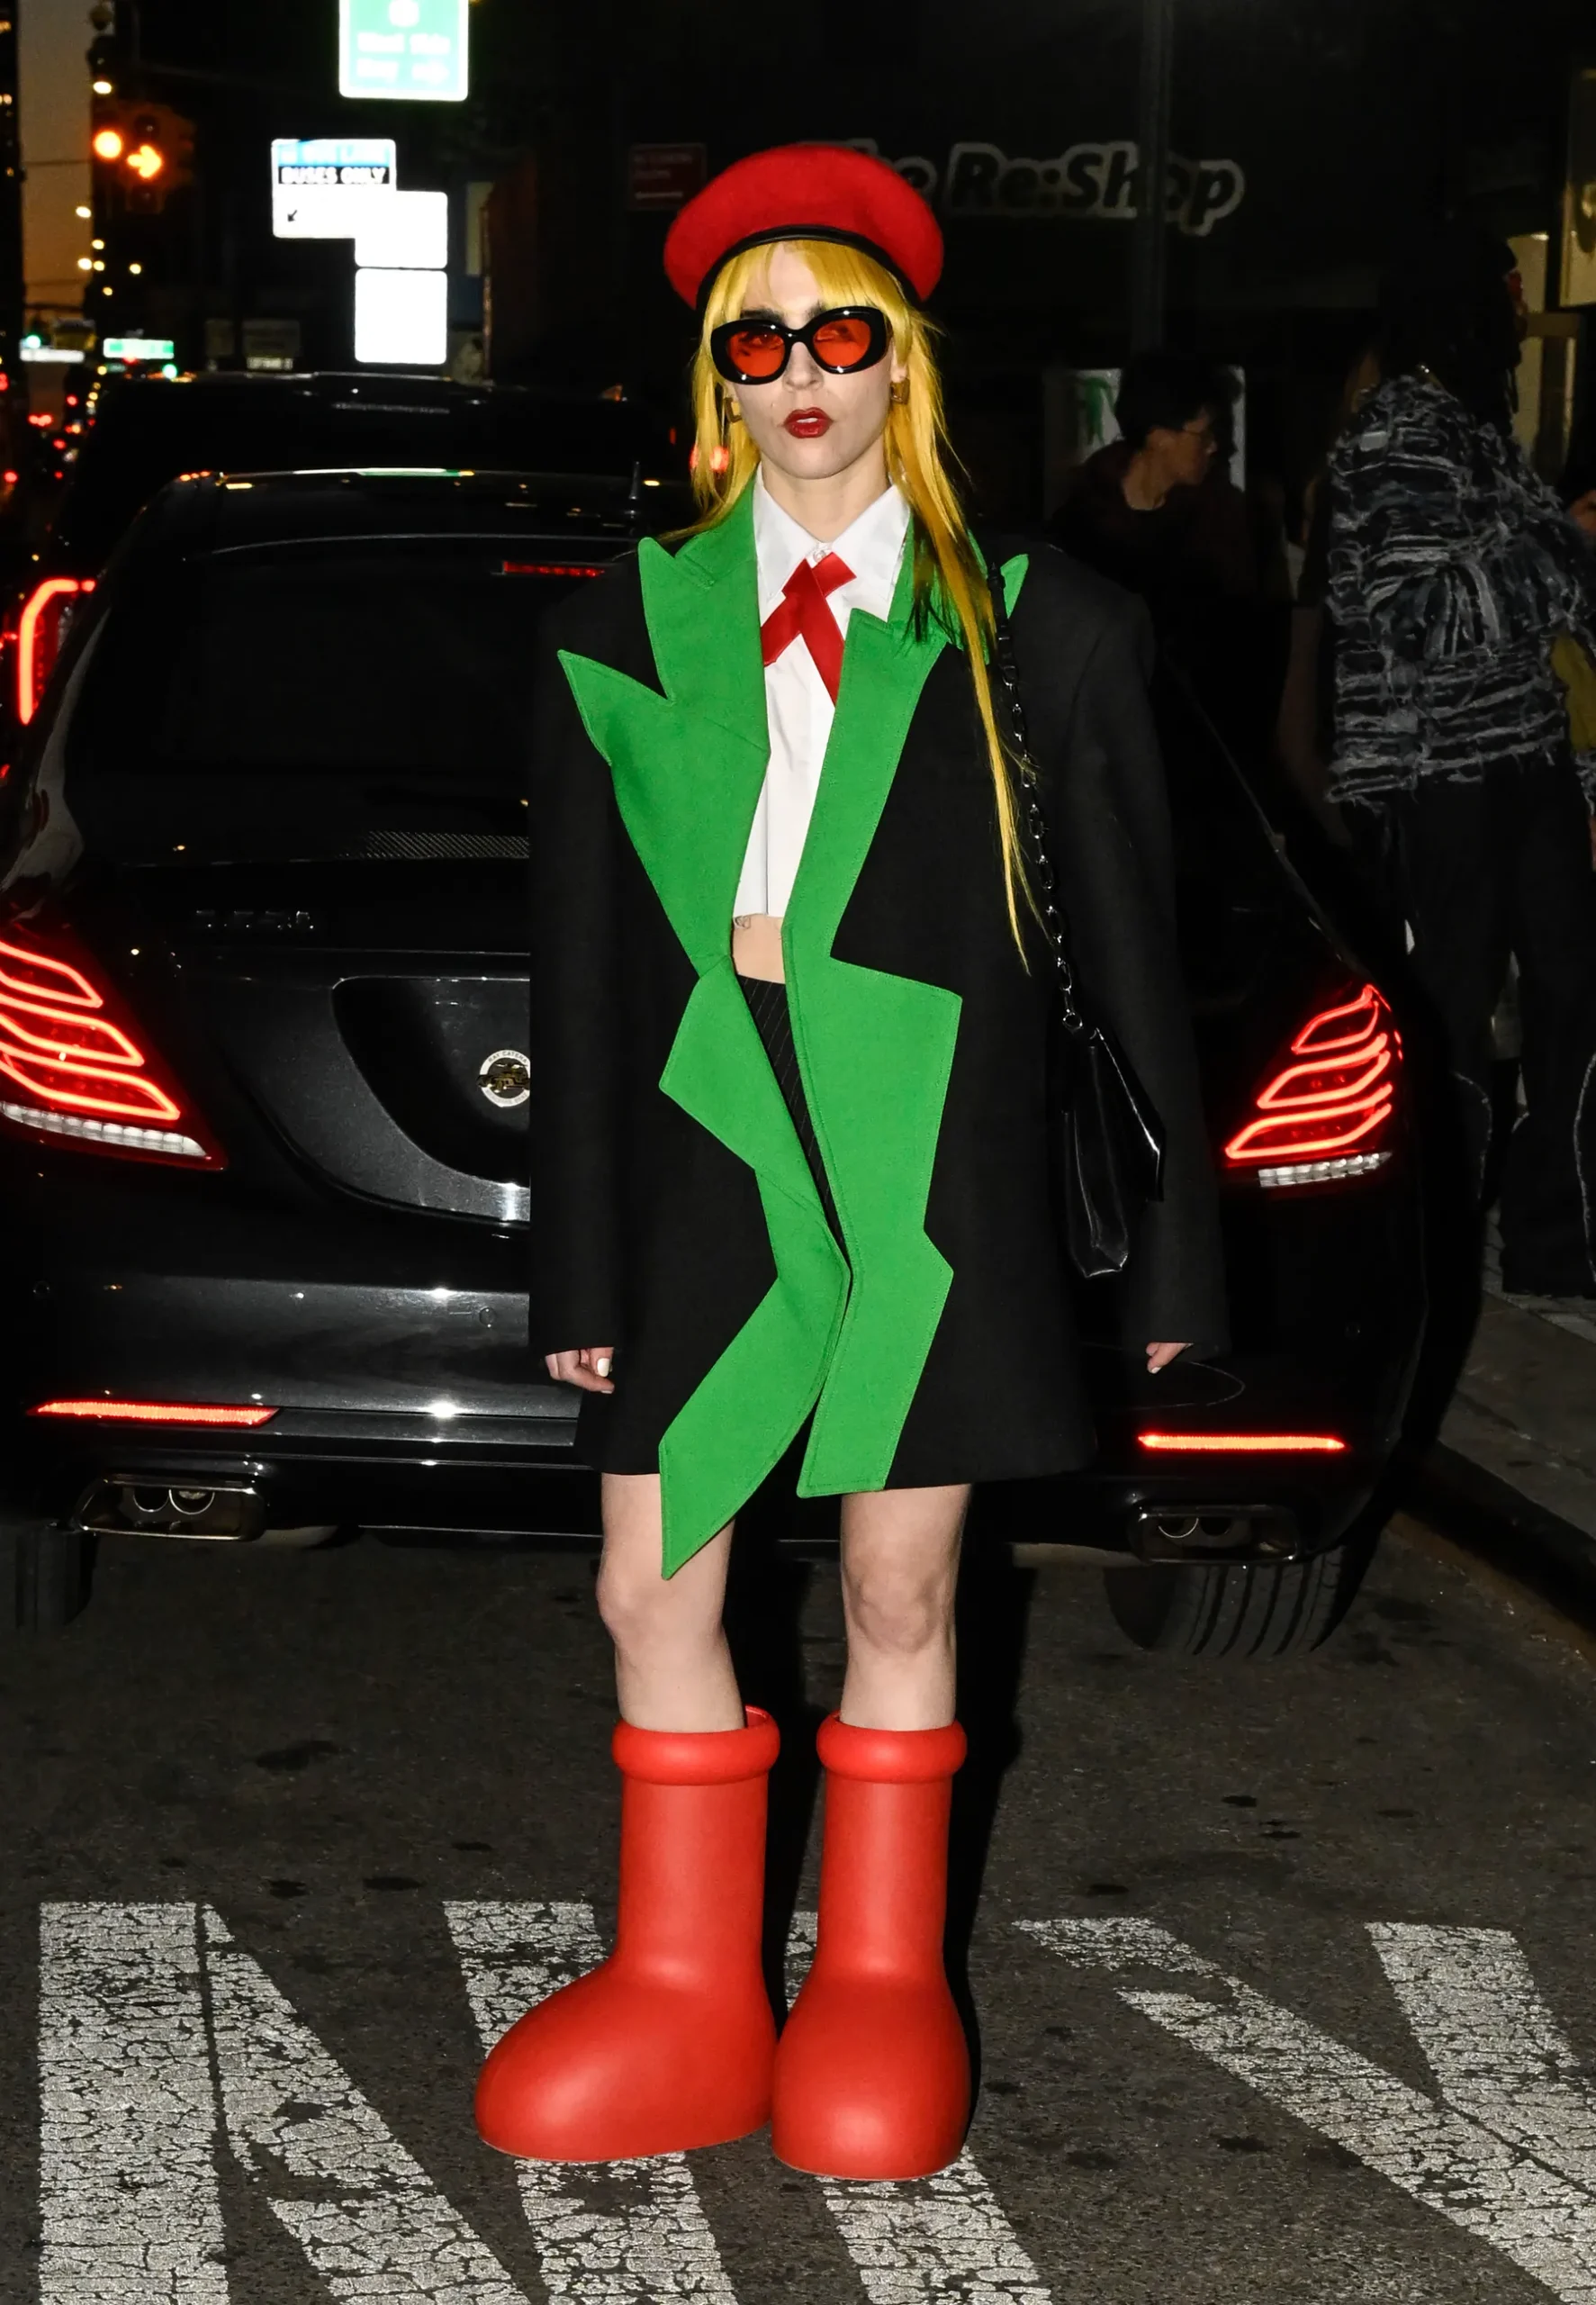 IN DEFENCE OF ABSURDIST FASHION: The social phenomena behind the viral Red Boots